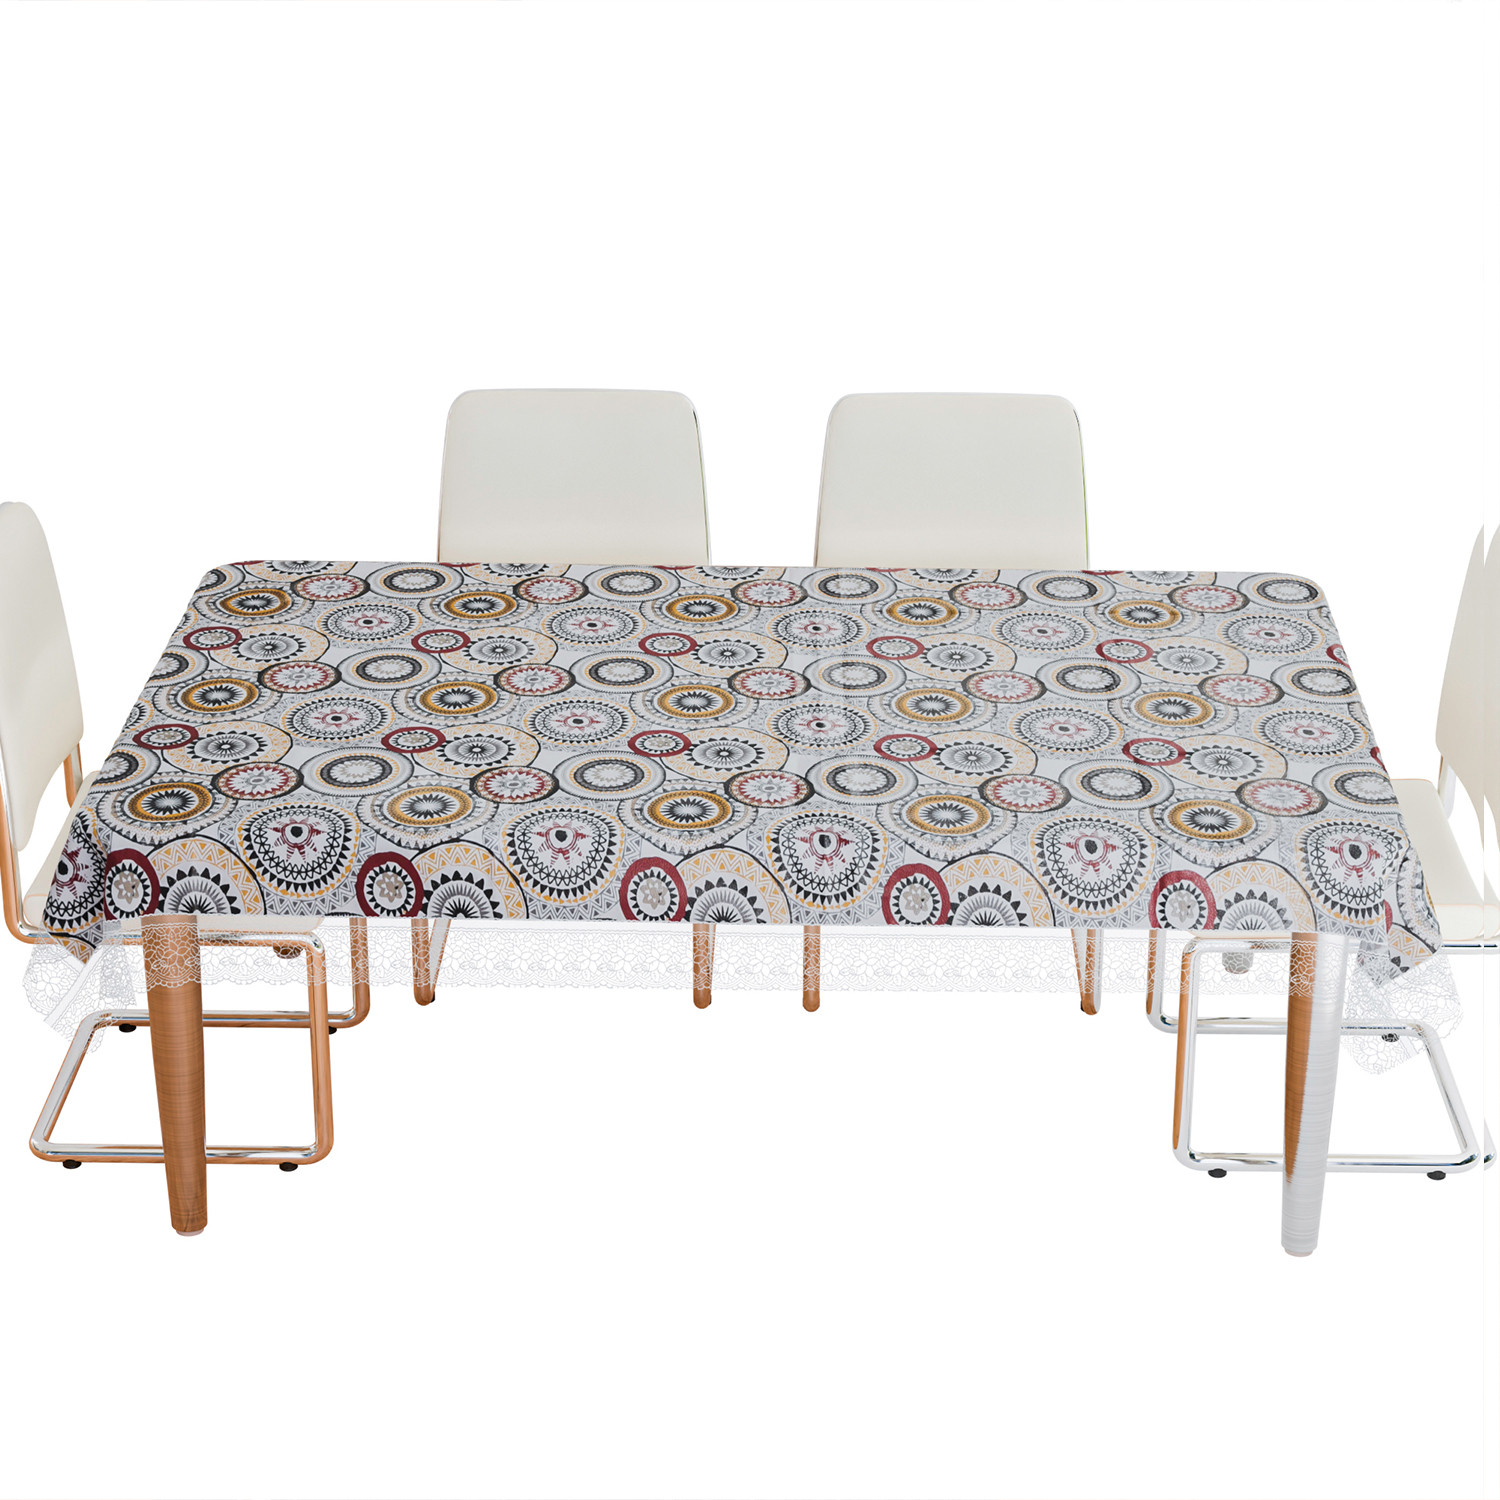 Kuber Industries Dining Table Cover | PVC Table Cloth Cover | 6 Seater Table Cloth | Rangoli Table Cover | Table Protector | Table Cover for Dining Table | 60x90 Inch | DTC | White